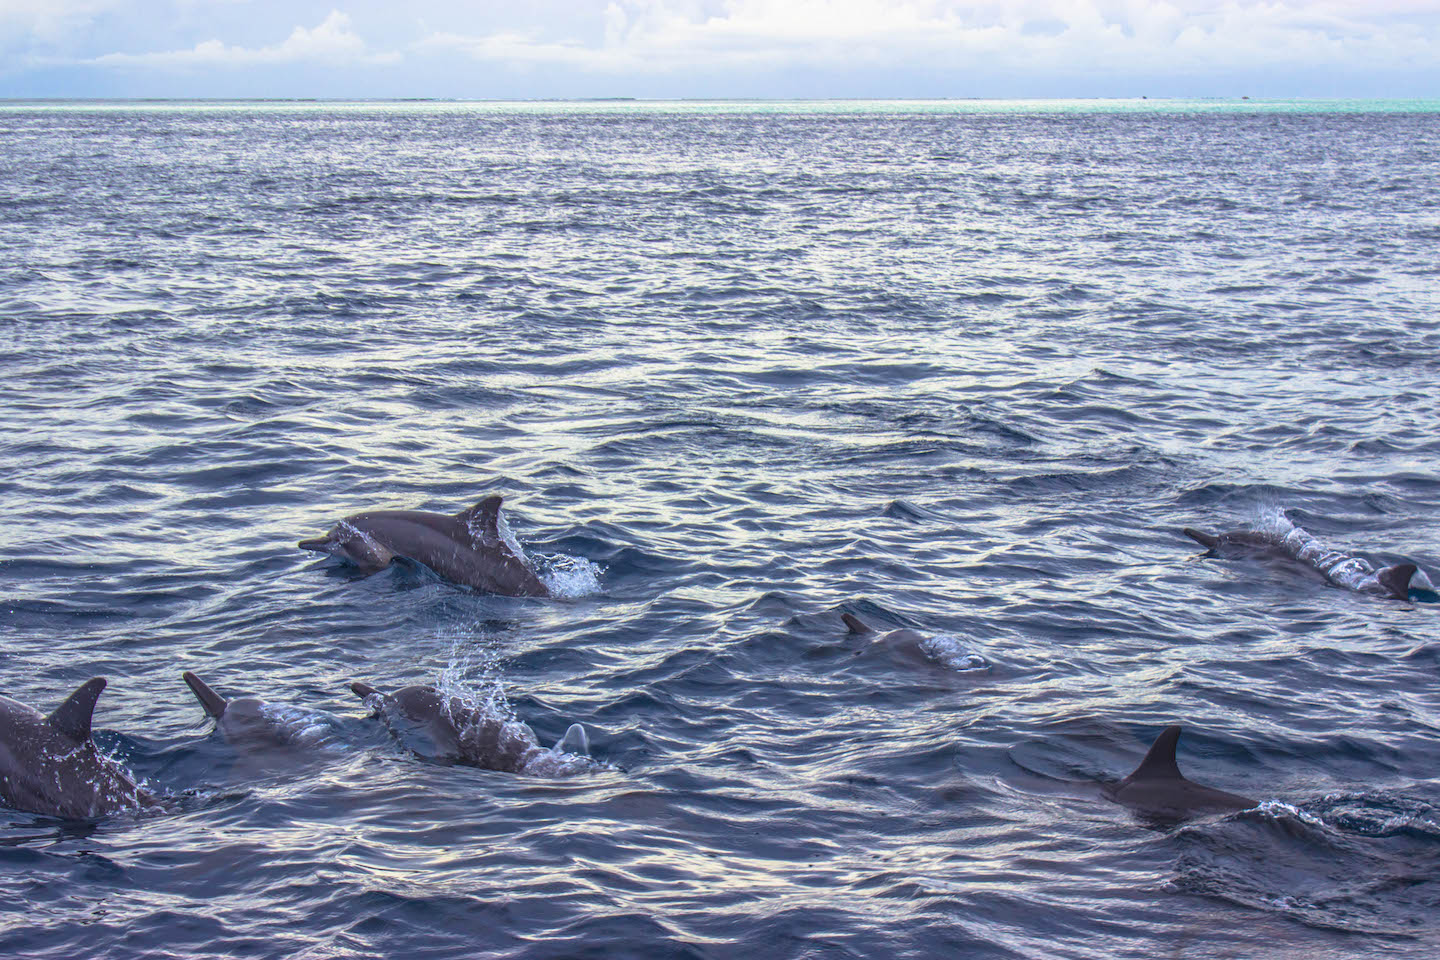 Dolphins close to our boat, Manta Point, Maldives